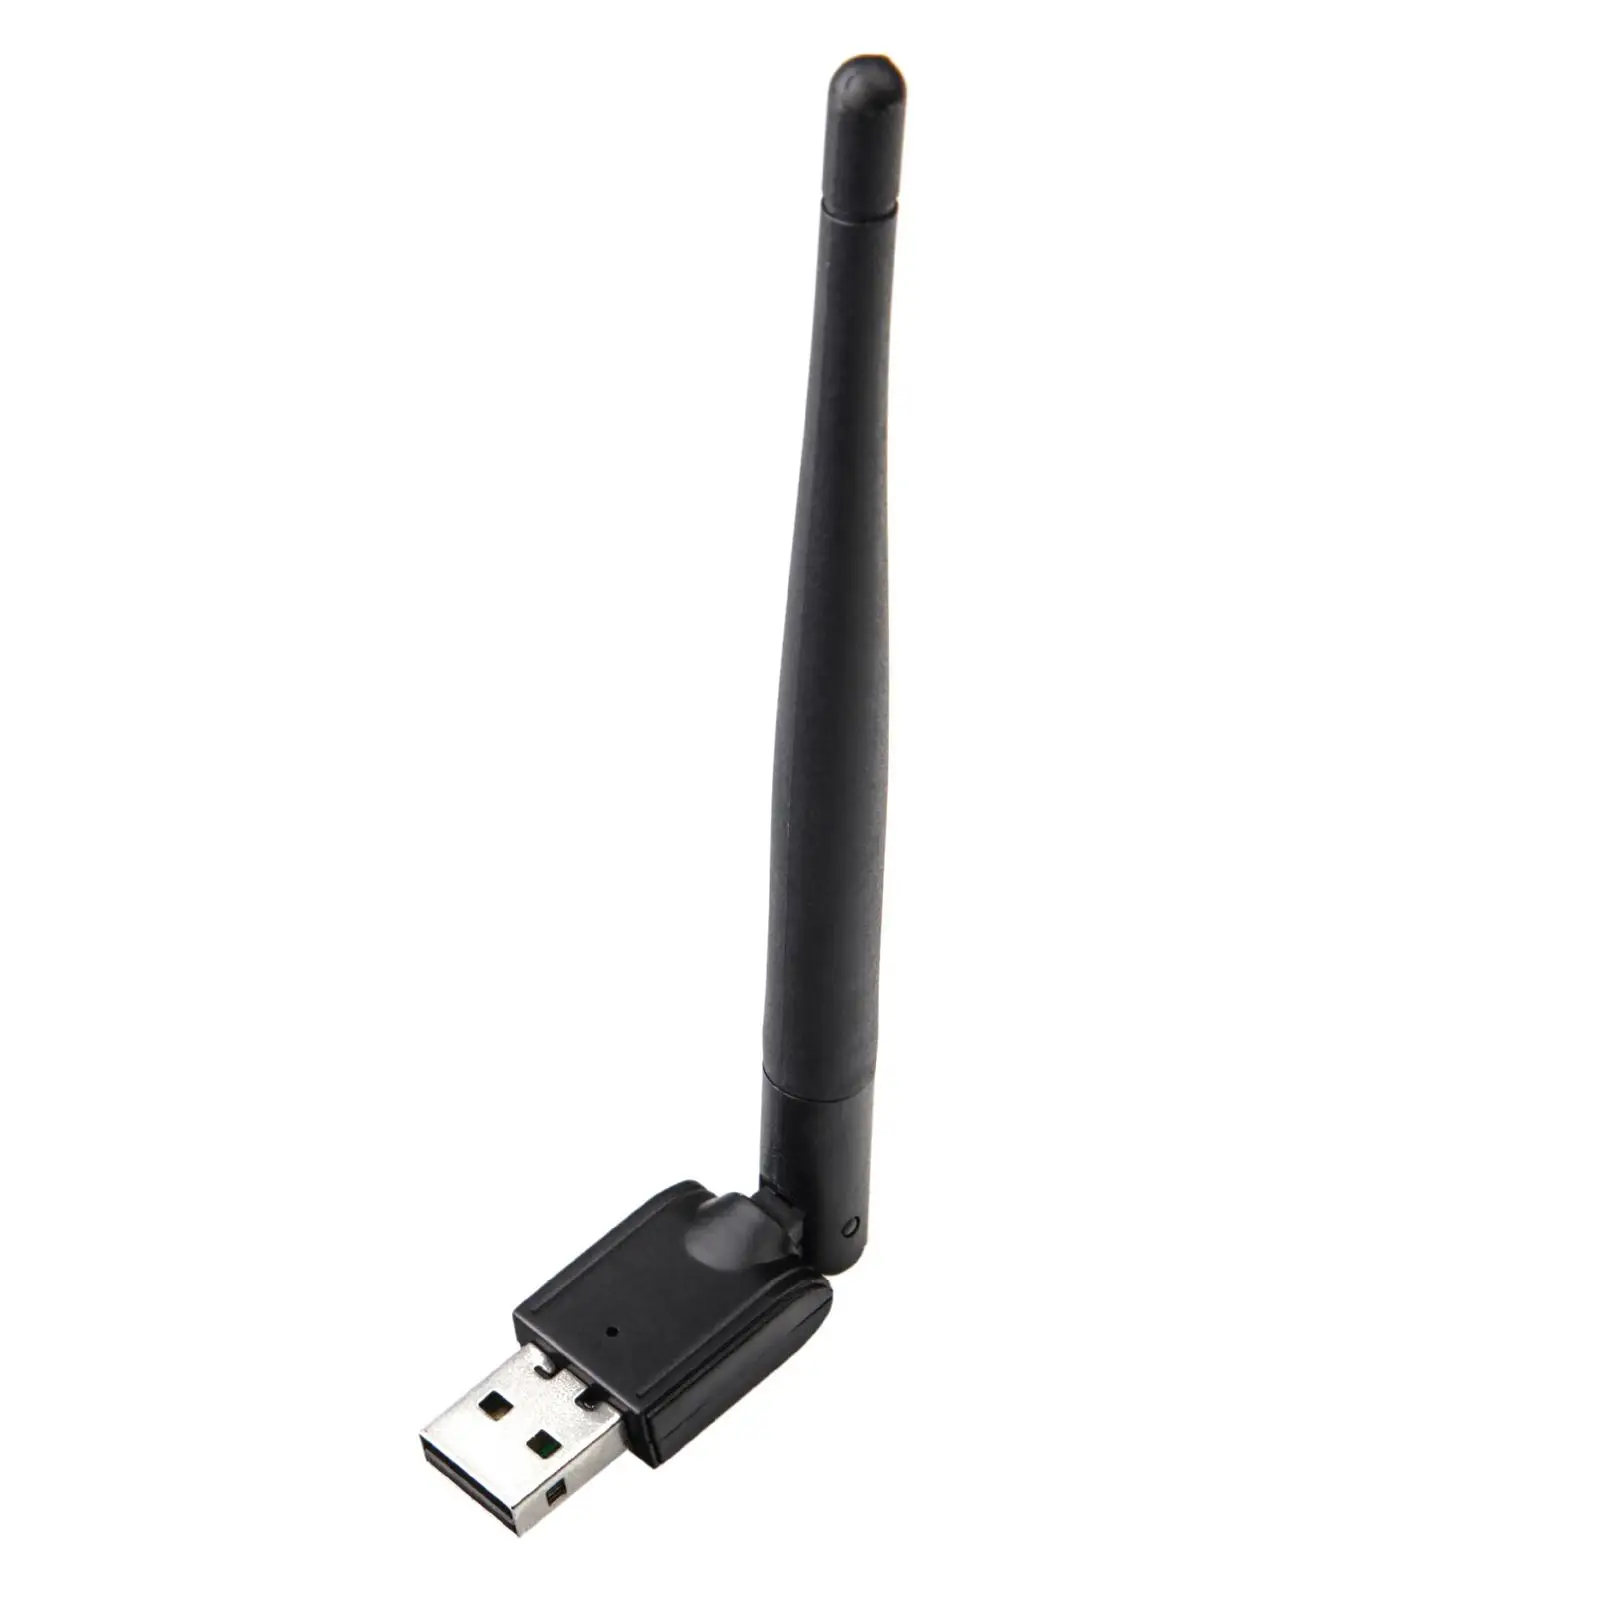 WiFi USB Adapter USB 2.0 Receiver for Top Boxes Accessory Professional Durable